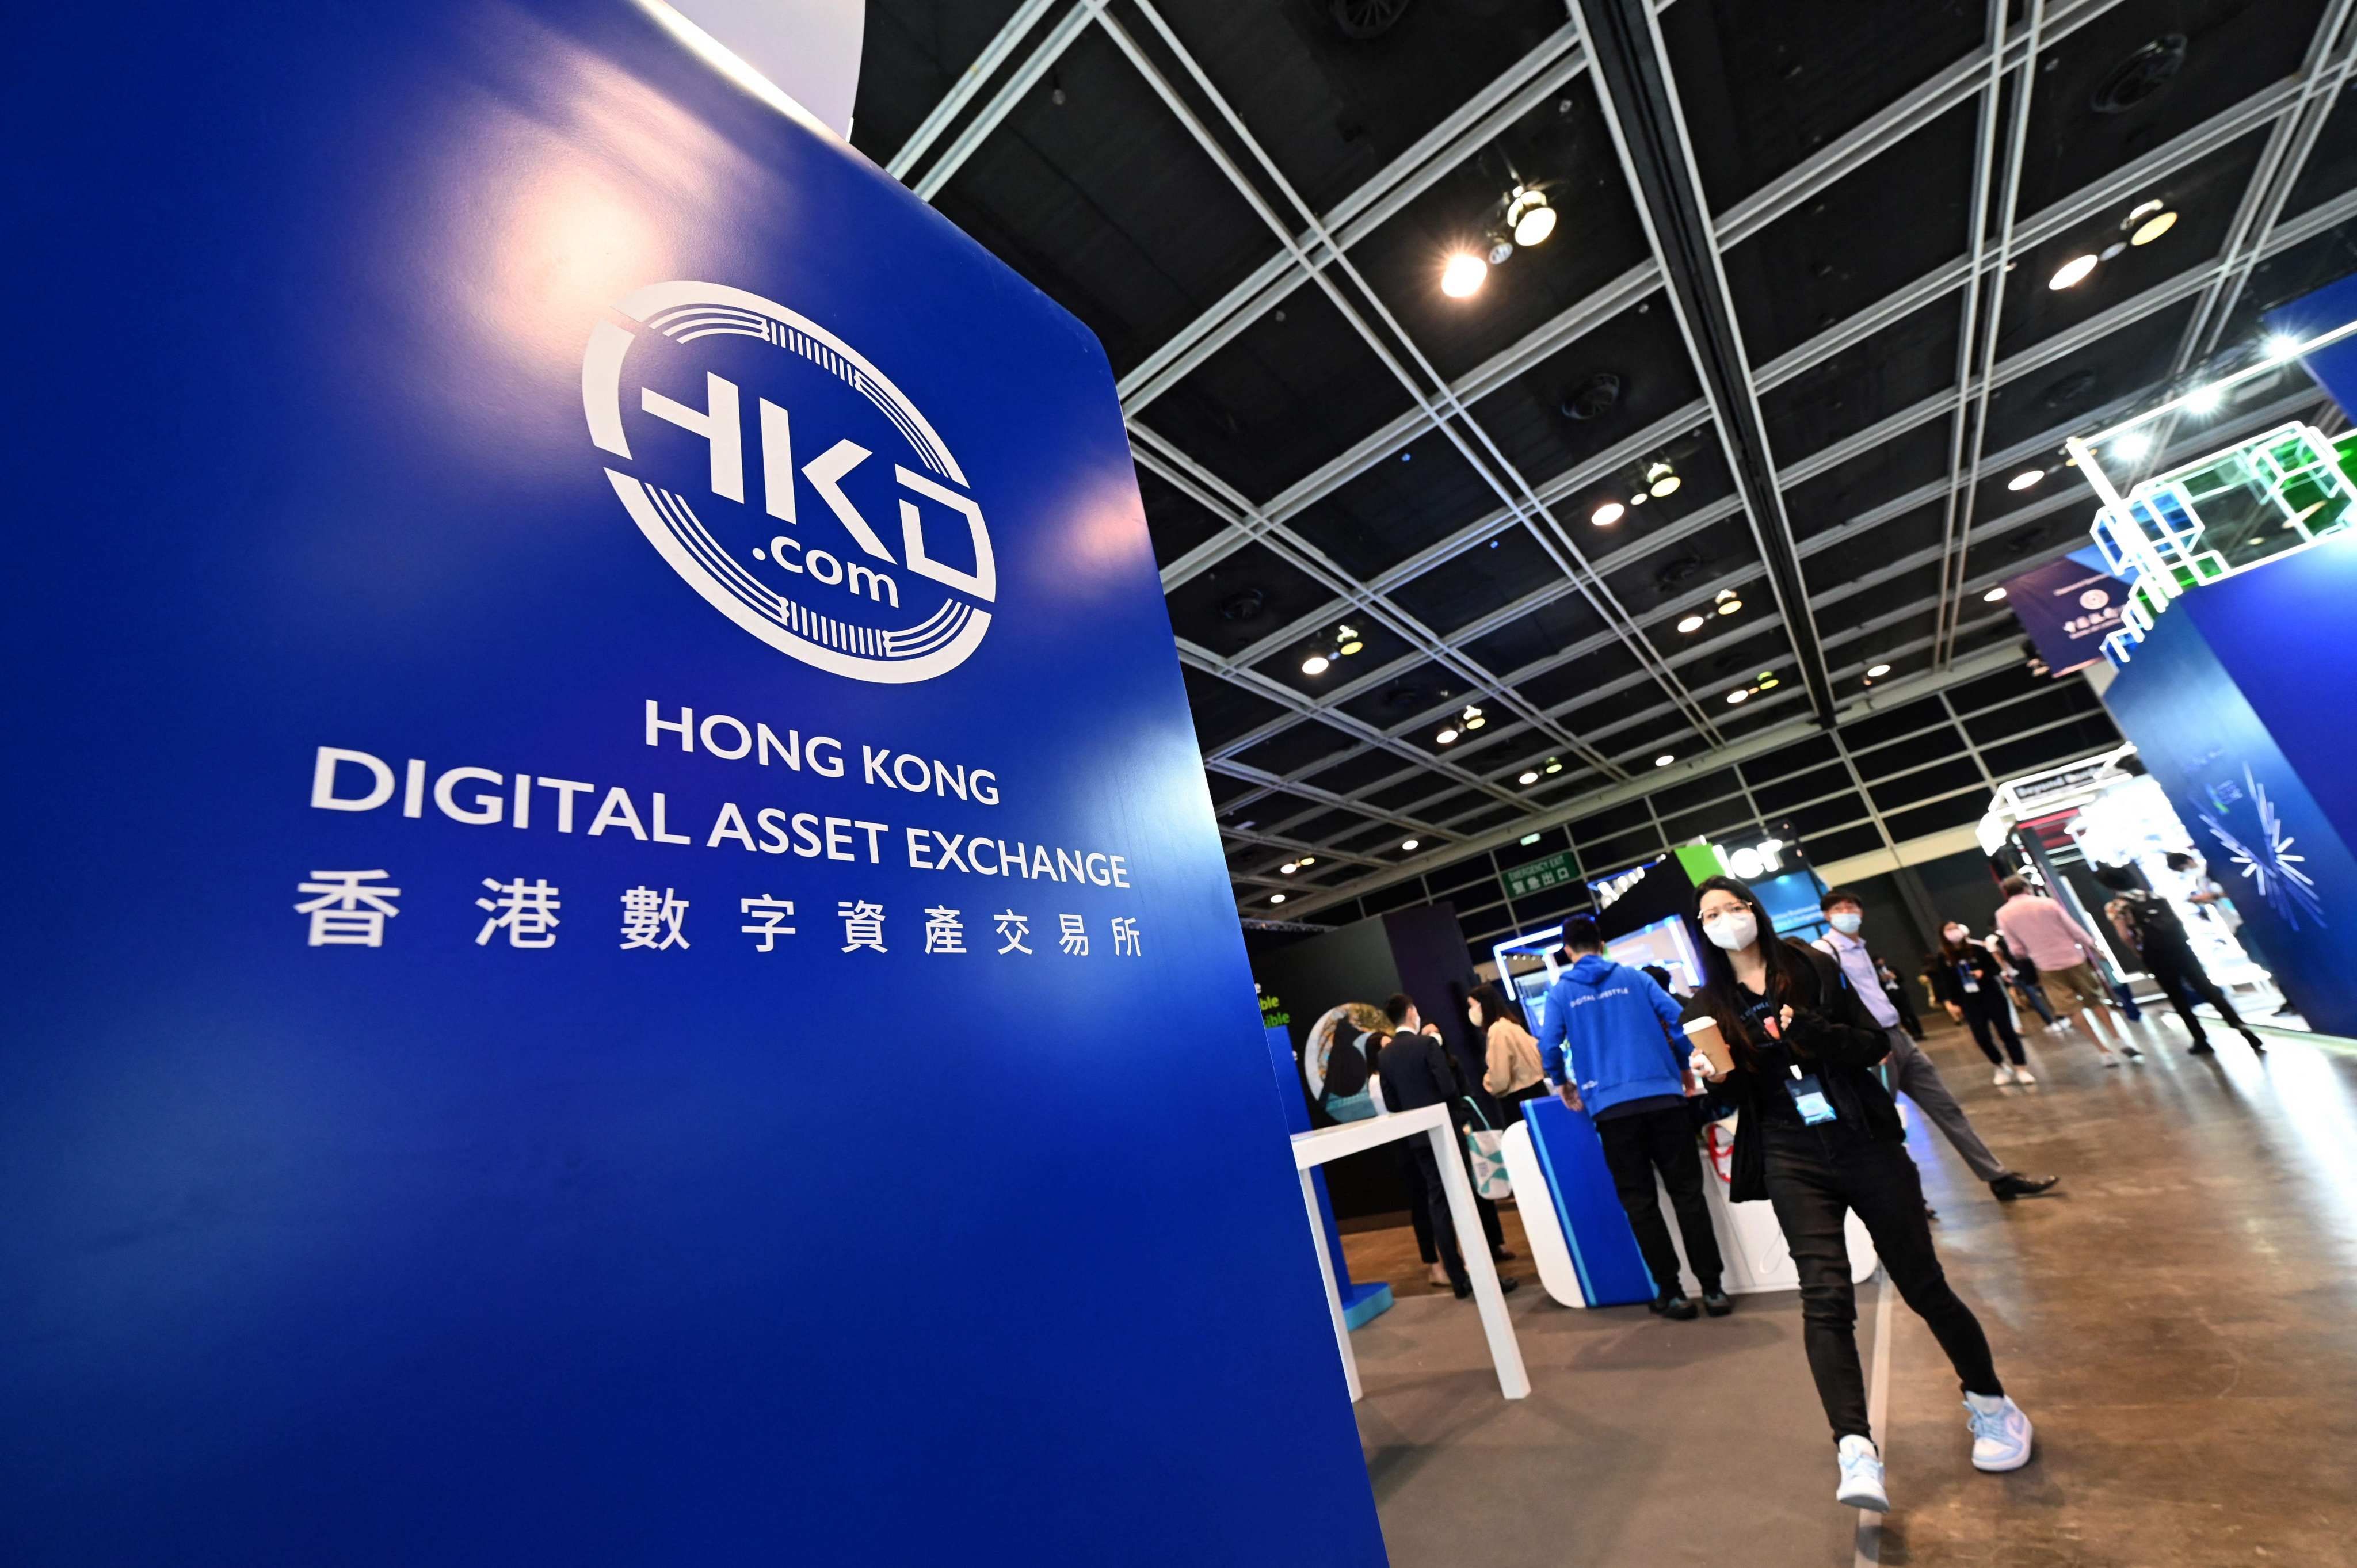 A Hong Kong Digital Asset Exchange booth is seen during Fintech Week in Hong Kong on October 31, 2022. The new regulatory regime could spur further innovation in Hong Kong and drive the adoption of digital assets. Photo: AFP